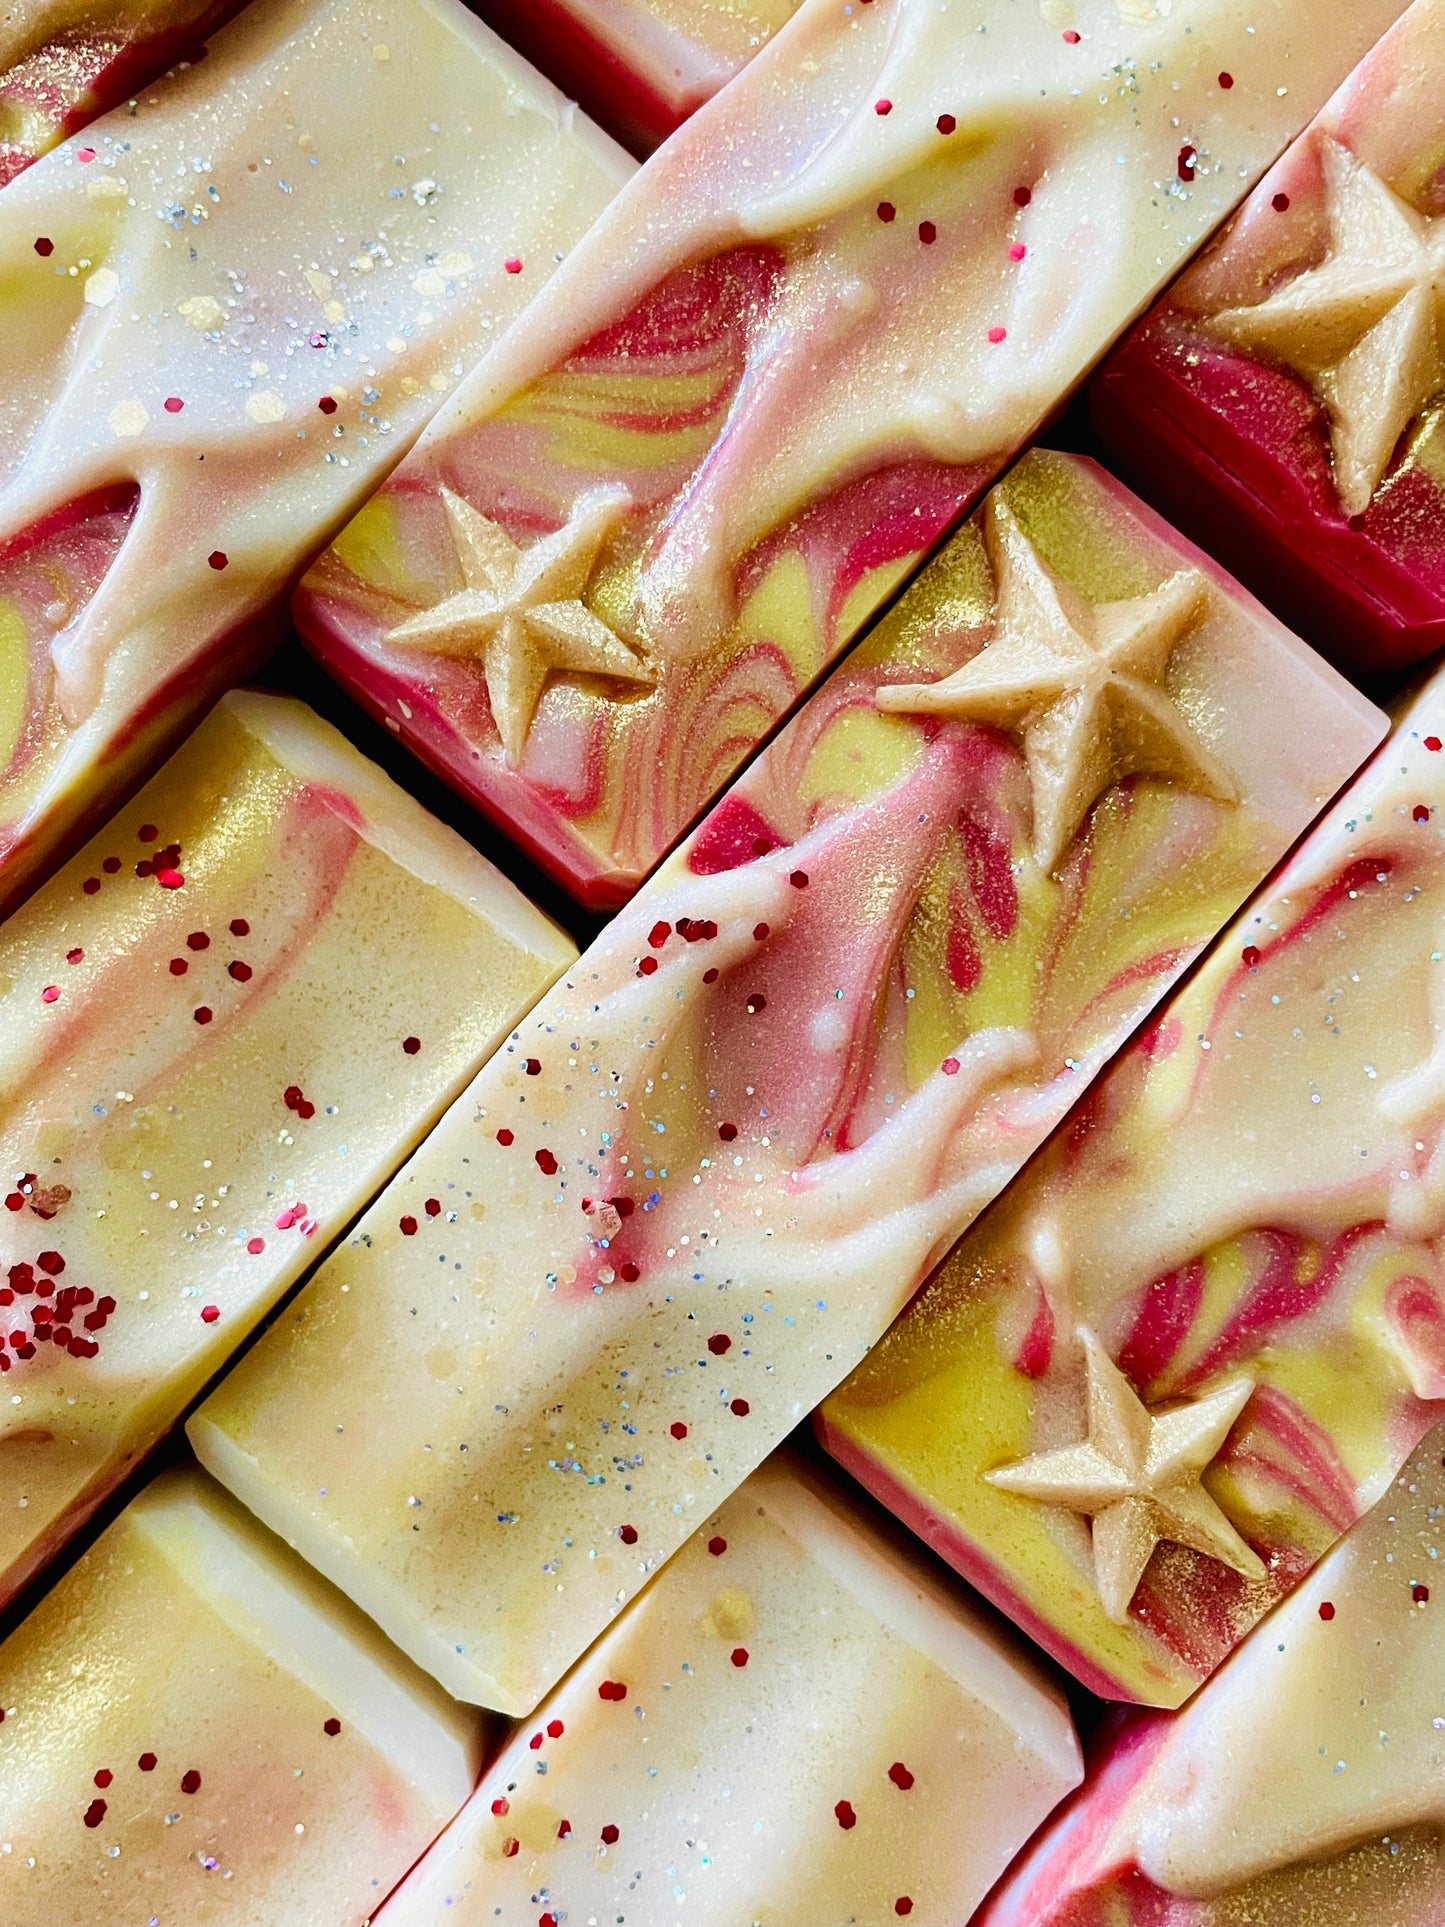 A closeup of the tops of Supernova bar soaps. Each bar has star soap dough embed on top.